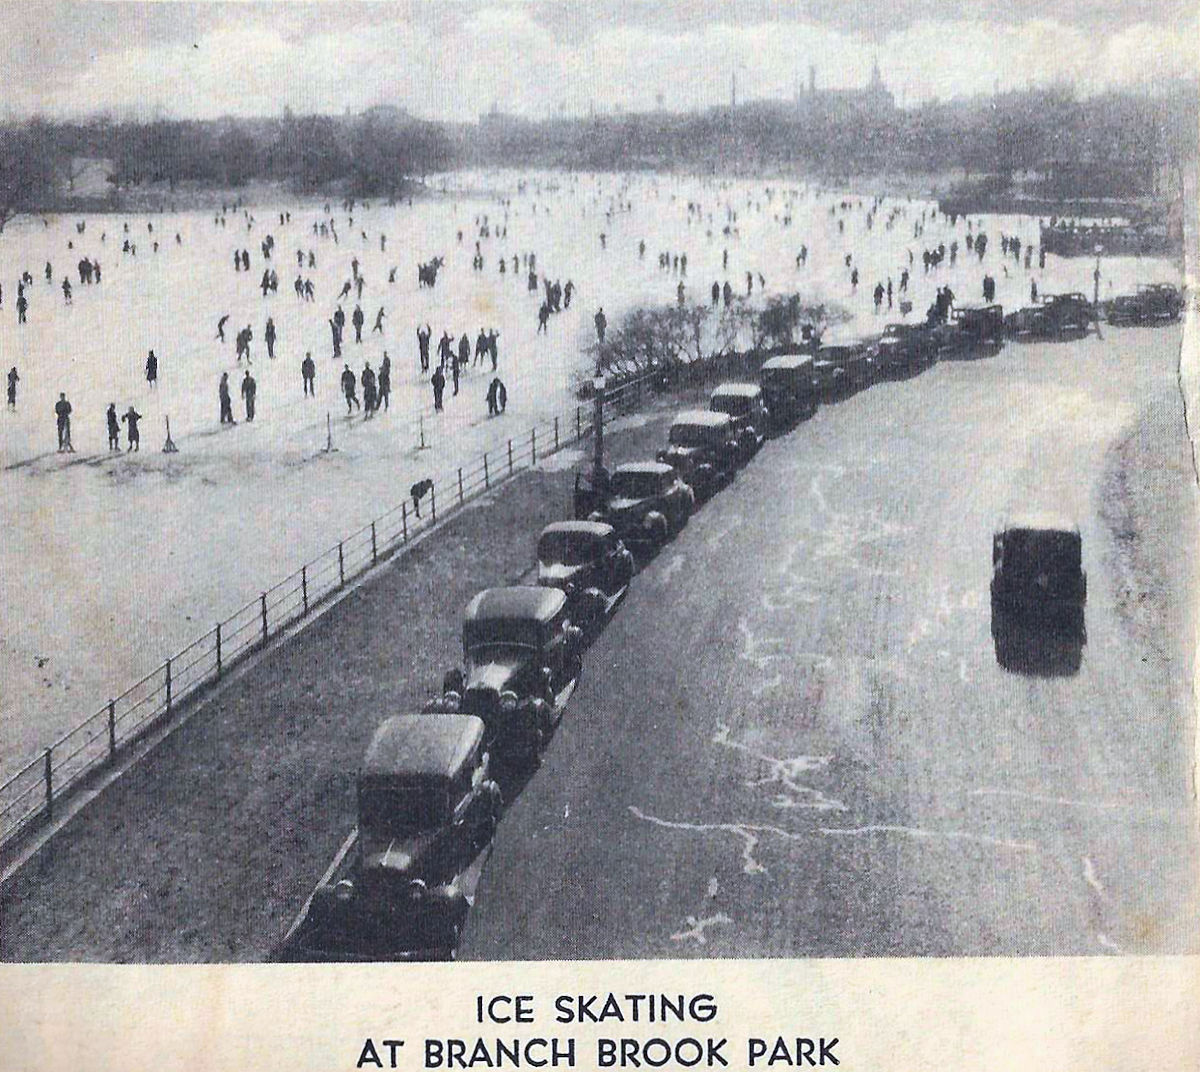 Ice Skating
Photo from Street & Road Map of Essex County
1953
